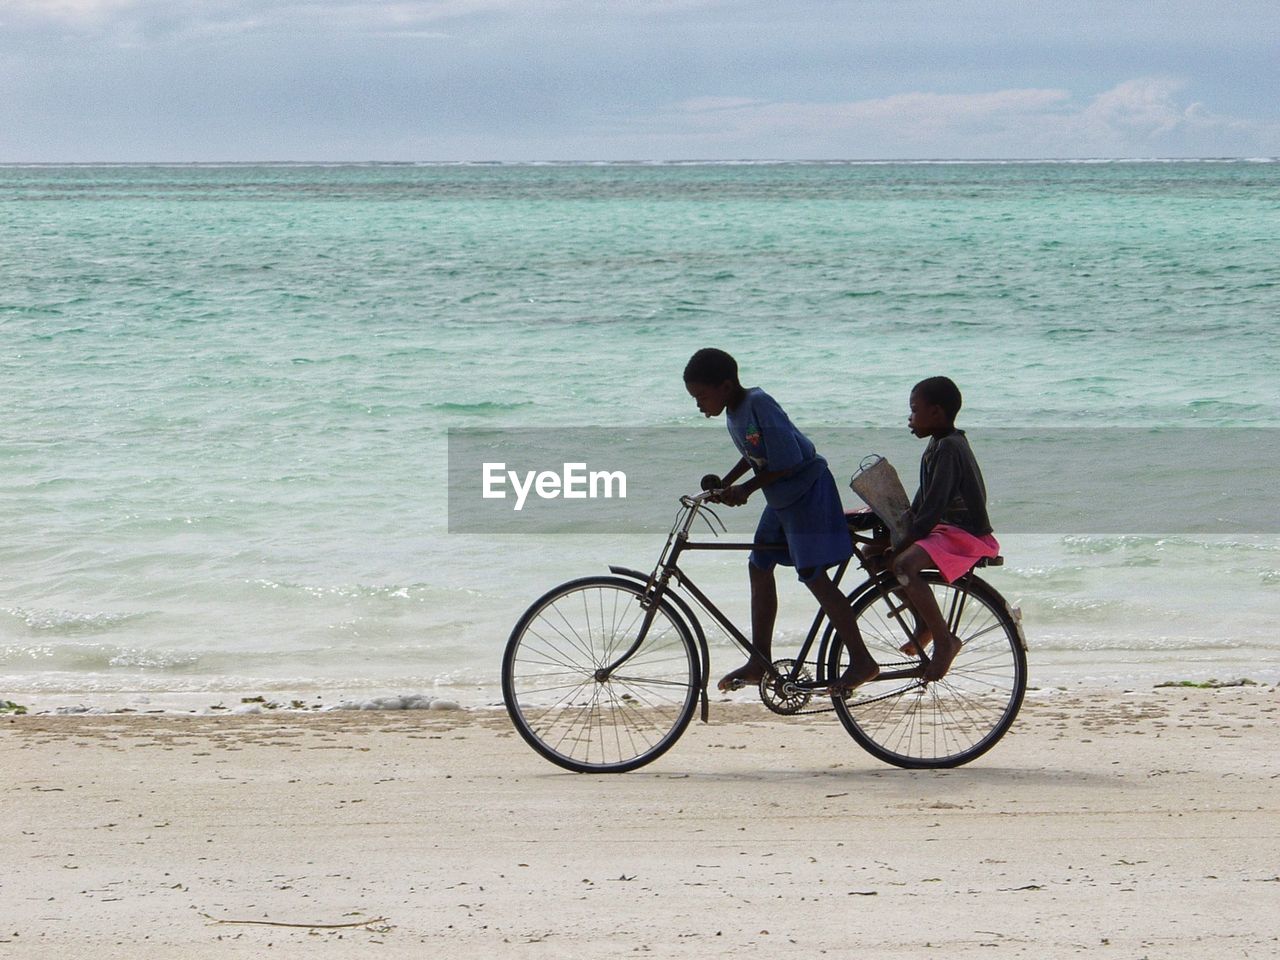 MAN AND BICYCLE ON BEACH